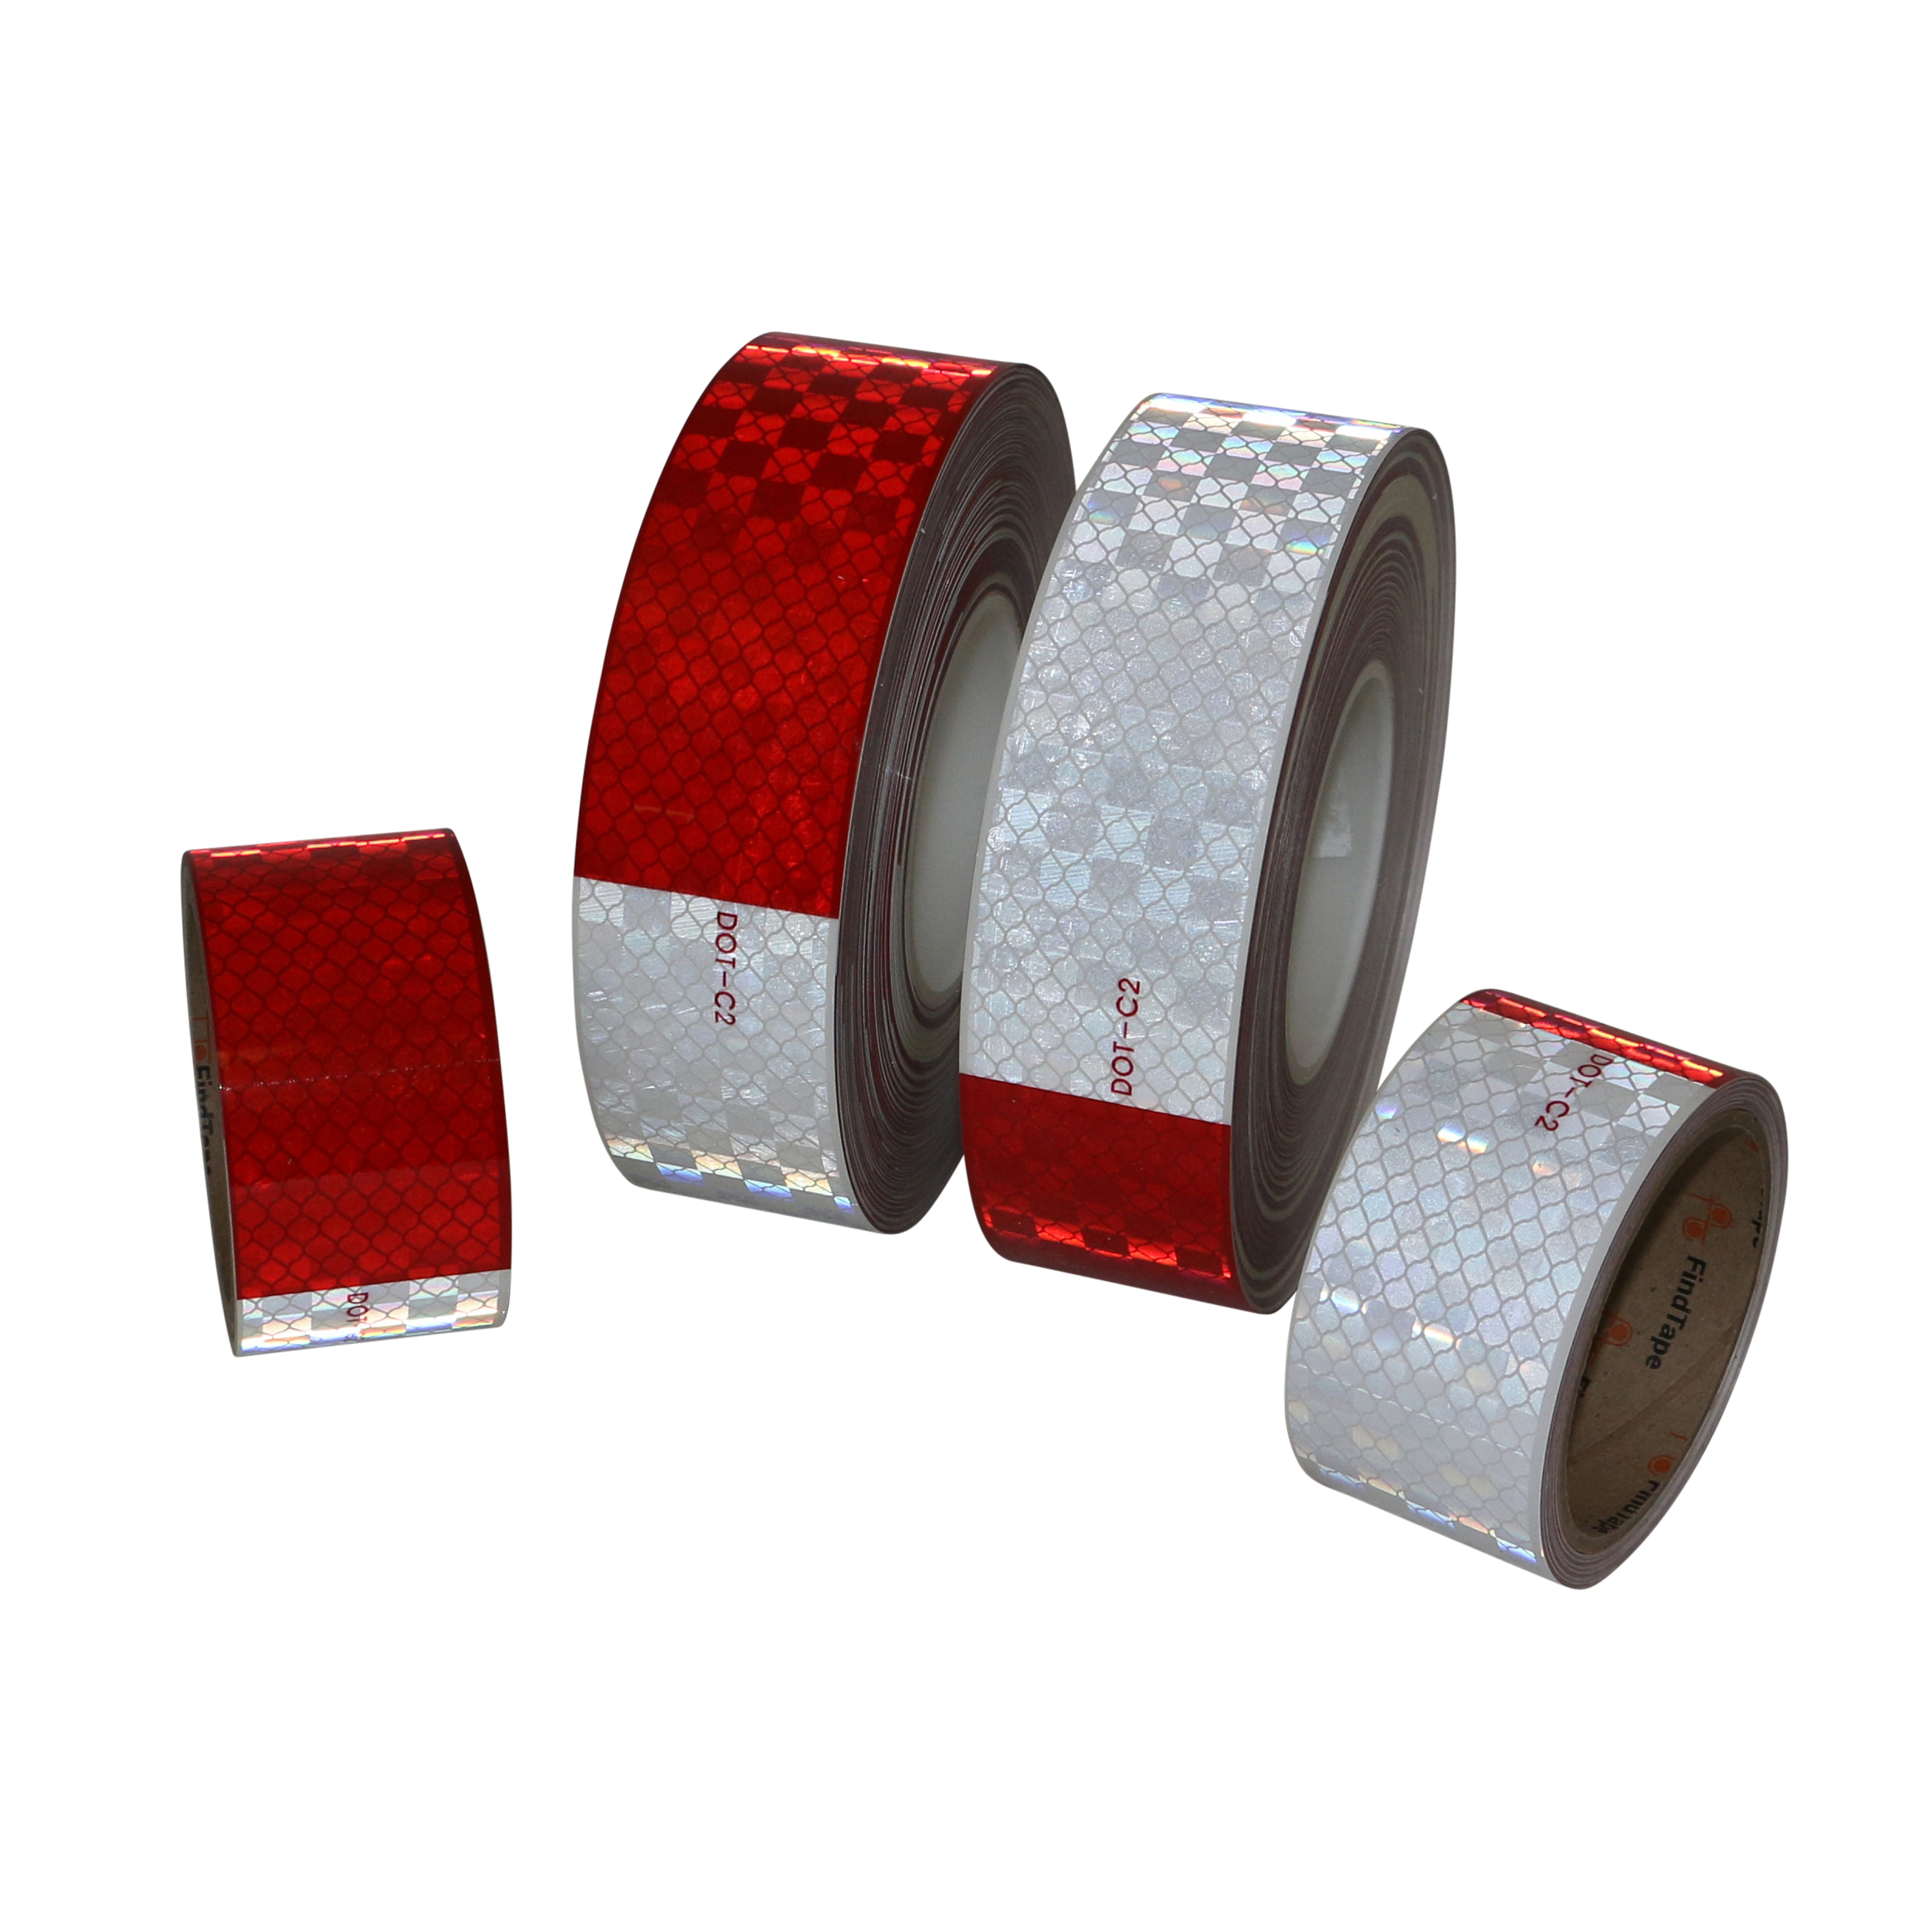 3m=10’ 5cm CCC=DOT-C2 REFLECTIVE CONSPICUITY TAPE SAFETY Orange YELLOW 